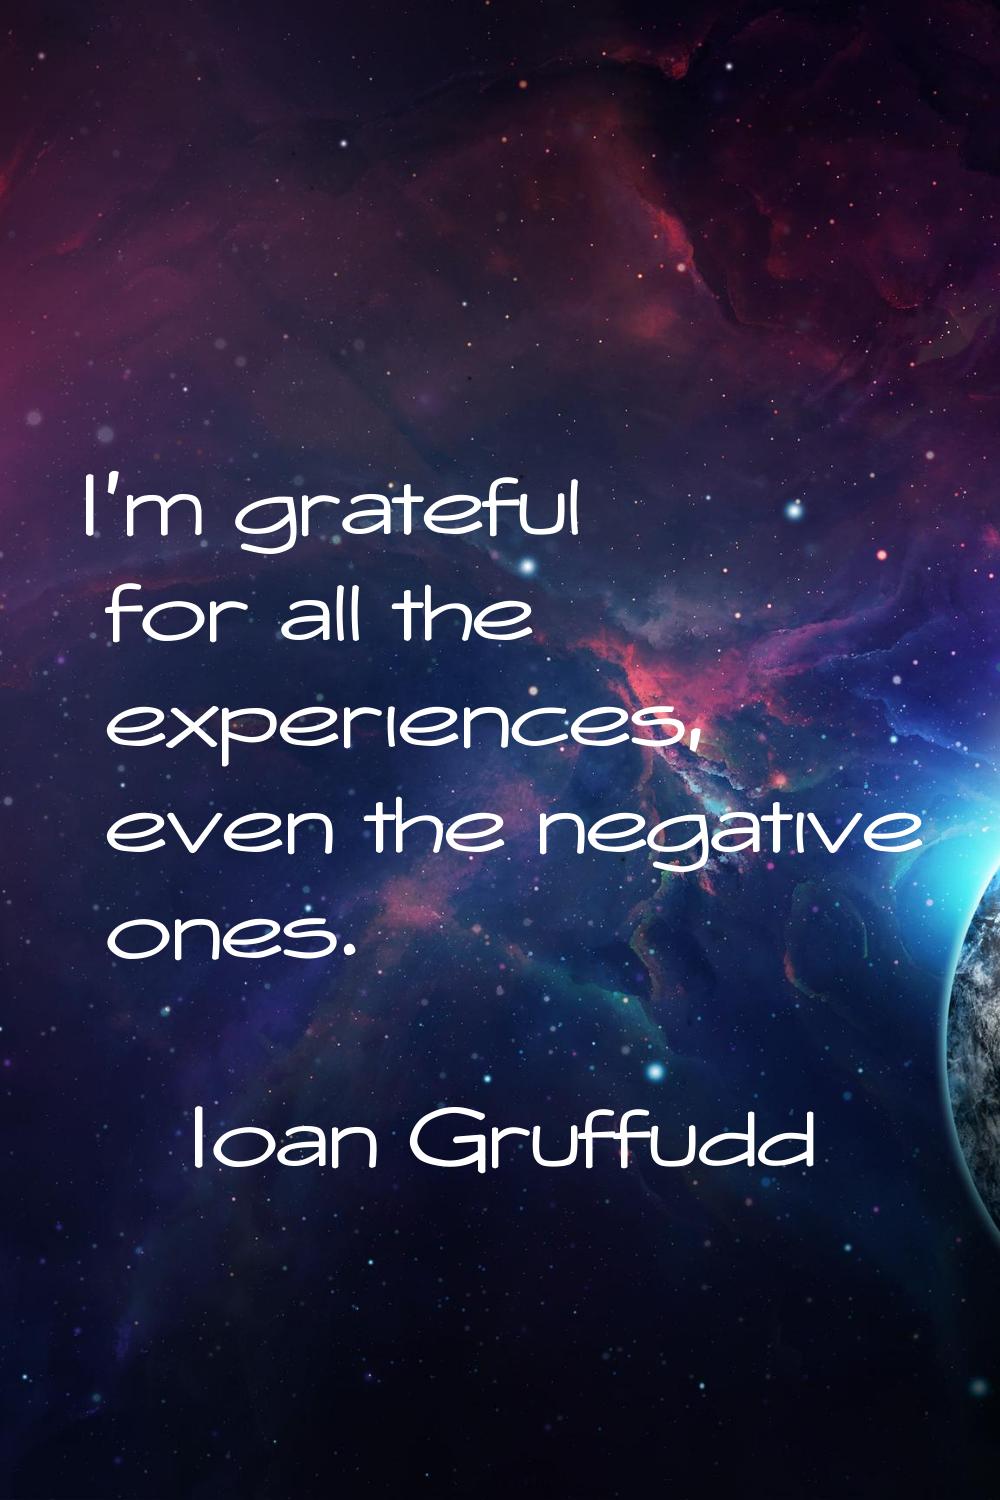 I'm grateful for all the experiences, even the negative ones.